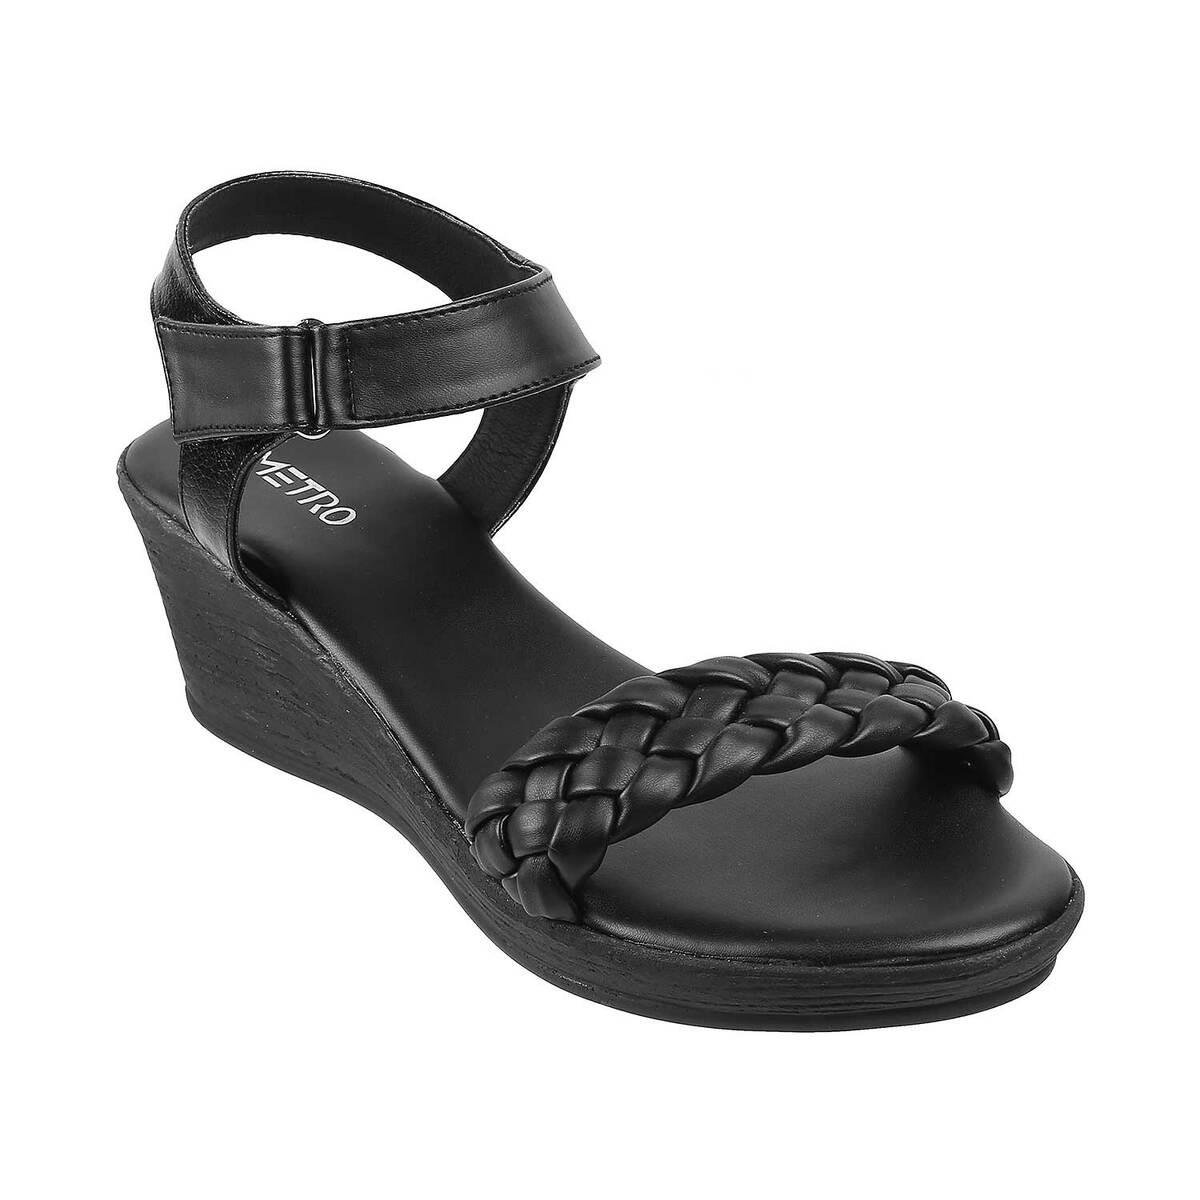 Buy Sapatos Women Casual Sandals, Ideal for Women (ST-6261-Black-36) at  Amazon.in